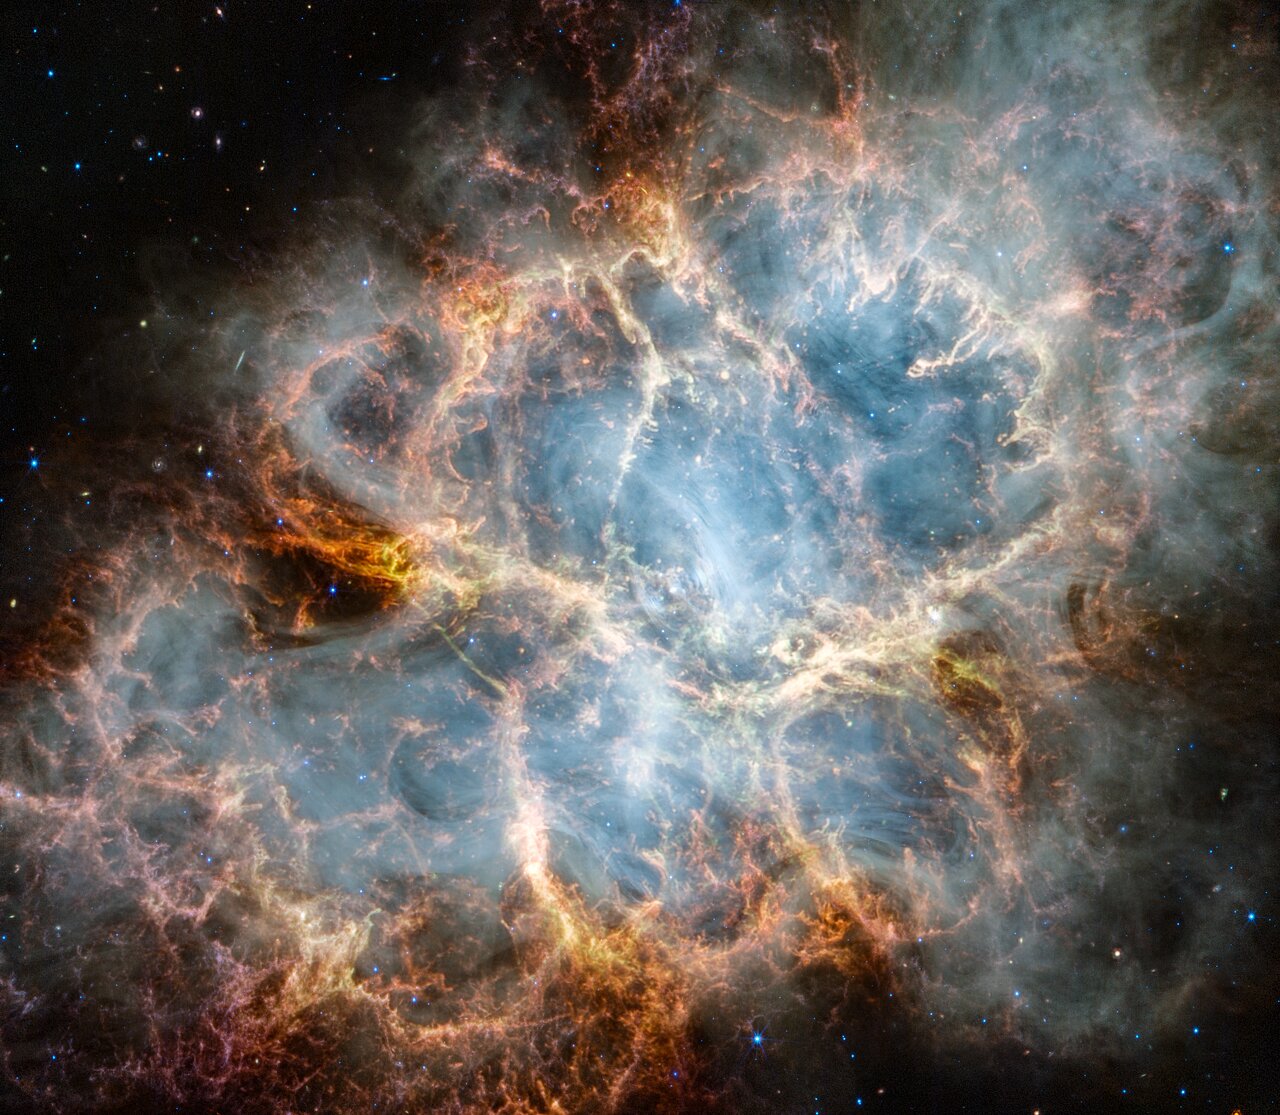 The NASA/ESA/CSA James Webb Space Telescope has gazed at the Crab Nebula in the search for answers about the supernova remnant’s origins. Webb’s NIRCam (Near-Infrared Camera) and MIRI (Mid-Infrared Instrument) have revealed new details in infrared light. Similar to the Hubble optical wavelength image released in 2005, with Webb the remnant appears to consist of a crisp, cage-like structure of fluffy red-orange filaments of gas that trace doubly ionised sulphur (sulphur III). Within the remnant’s interior, yellow-white and green fluffy ridges form large-scale loop-like structures, which represent areas where dust particles reside. The area is composed of translucent, milky material. This material is emitting synchrotron radiation, which is emitted across the electromagnetic spectrum but becomes particularly vibrant thanks to Webb’s sensitivity and spatial resolution. It is generated by particles accelerated to extremely high speeds as they wind around magnetic field lines. The synchrotron radiation can be traced throughout the majority of the Crab Nebula’s interior. Locate the wisps that follow a ripple-like pattern in the middle. In the centre of this ring-like structure is a bright white dot: a rapidly rotating neutron star. Further out from the core, follow the thin white ribbons of the radiation. The curvy wisps are closely grouped together, following different directions that mimic the structure of the pulsar’s magnetic field. Note how certain gas filaments are bluer in colour. These areas contain singly ionised iron (iron II). [Image description: An oval nebula with a complex structure against a black background. On the oval's exterior lie curtains of glowing red and orange fluffy material. Interior to this outer shell lie large-scale loops of mottled filaments of yellow-white and green, studded with clumps and knots. Translucent thin ribbons of smoky white lie within the remnant’s interior, brightest toward its centre.]